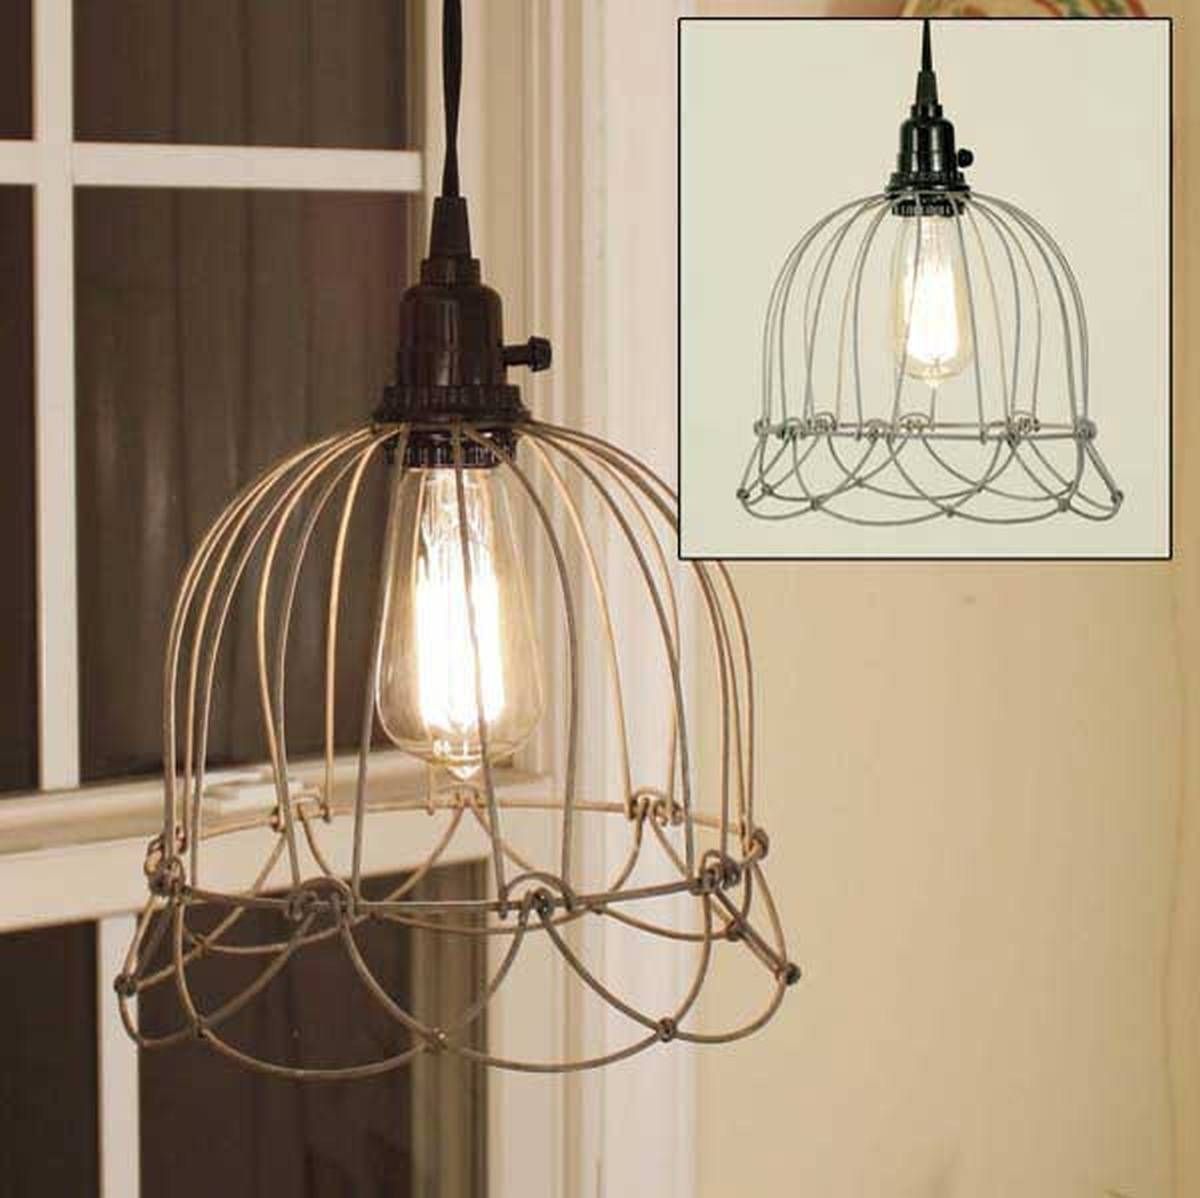 Amazing Wire Pendant Lights 23 For Your Battery Operated Pendant Within Battery Operated Pendant Lights Fixtures (View 4 of 15)